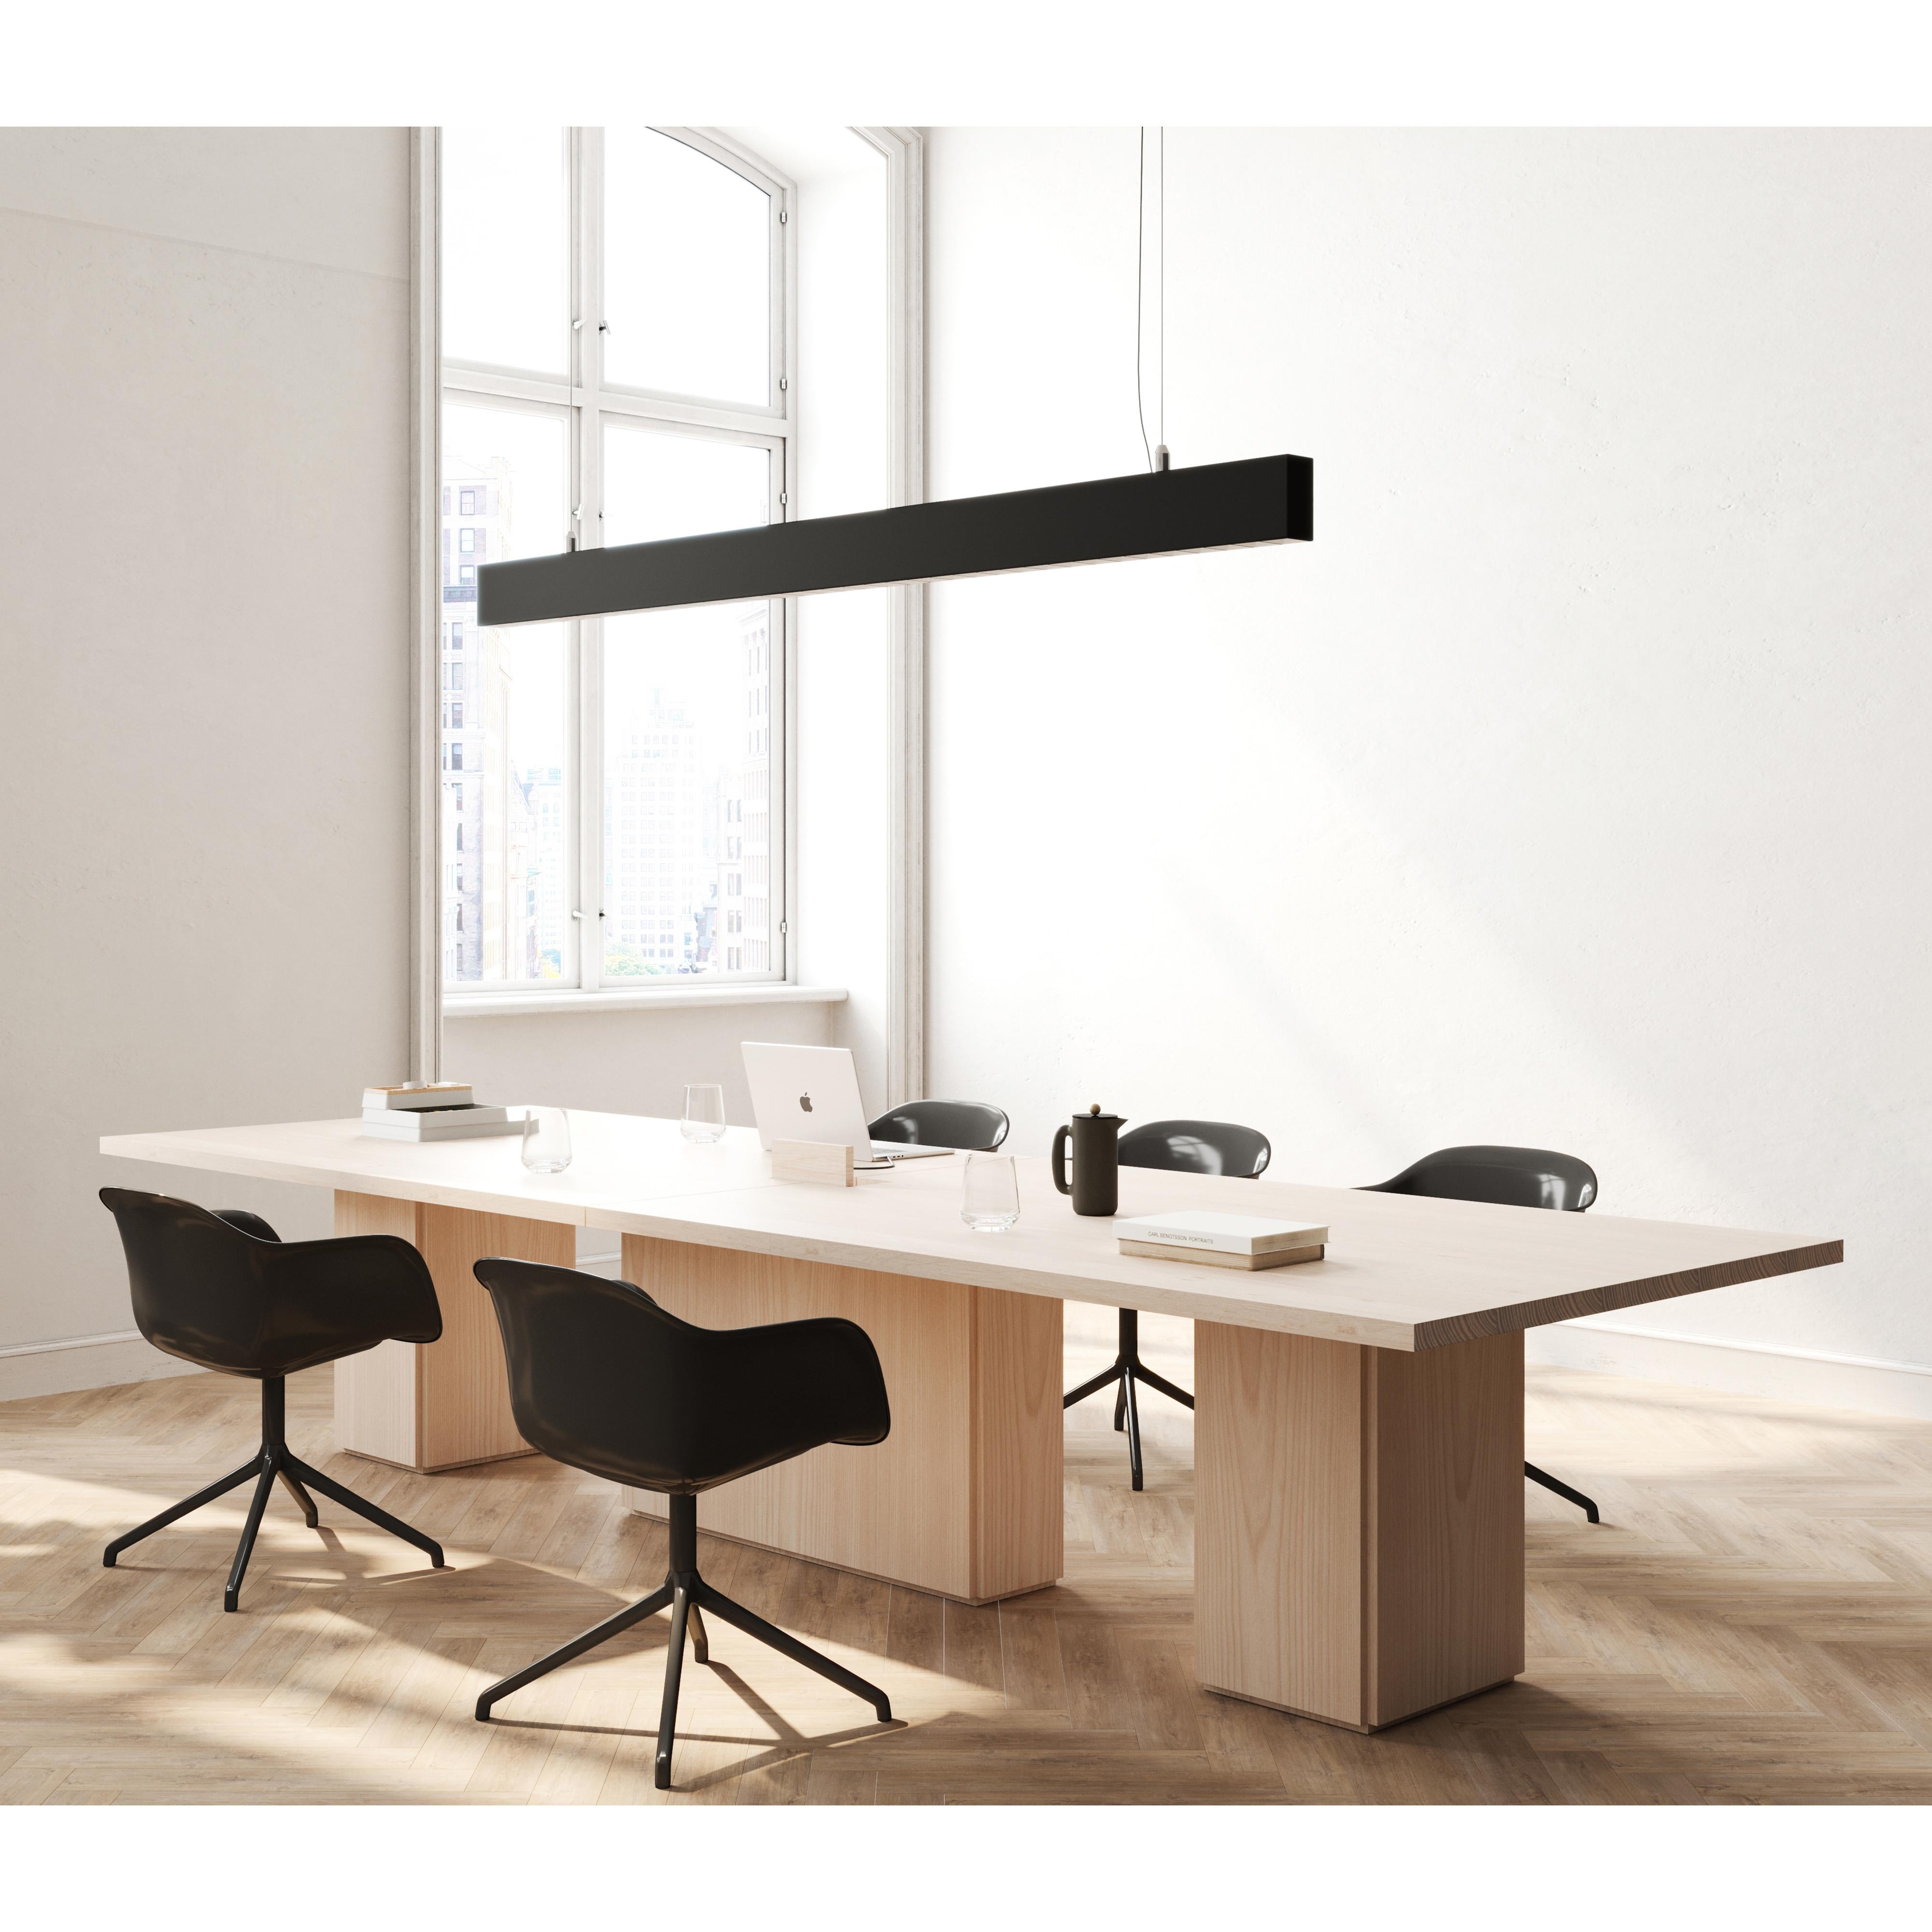 The slab conference table has an architectural silhouette in workspaces, adding dimension without detracting from the overall aesthetic. 

This simple table’s geometric form encompasses a solid wood rectangular top balanced atop two to three